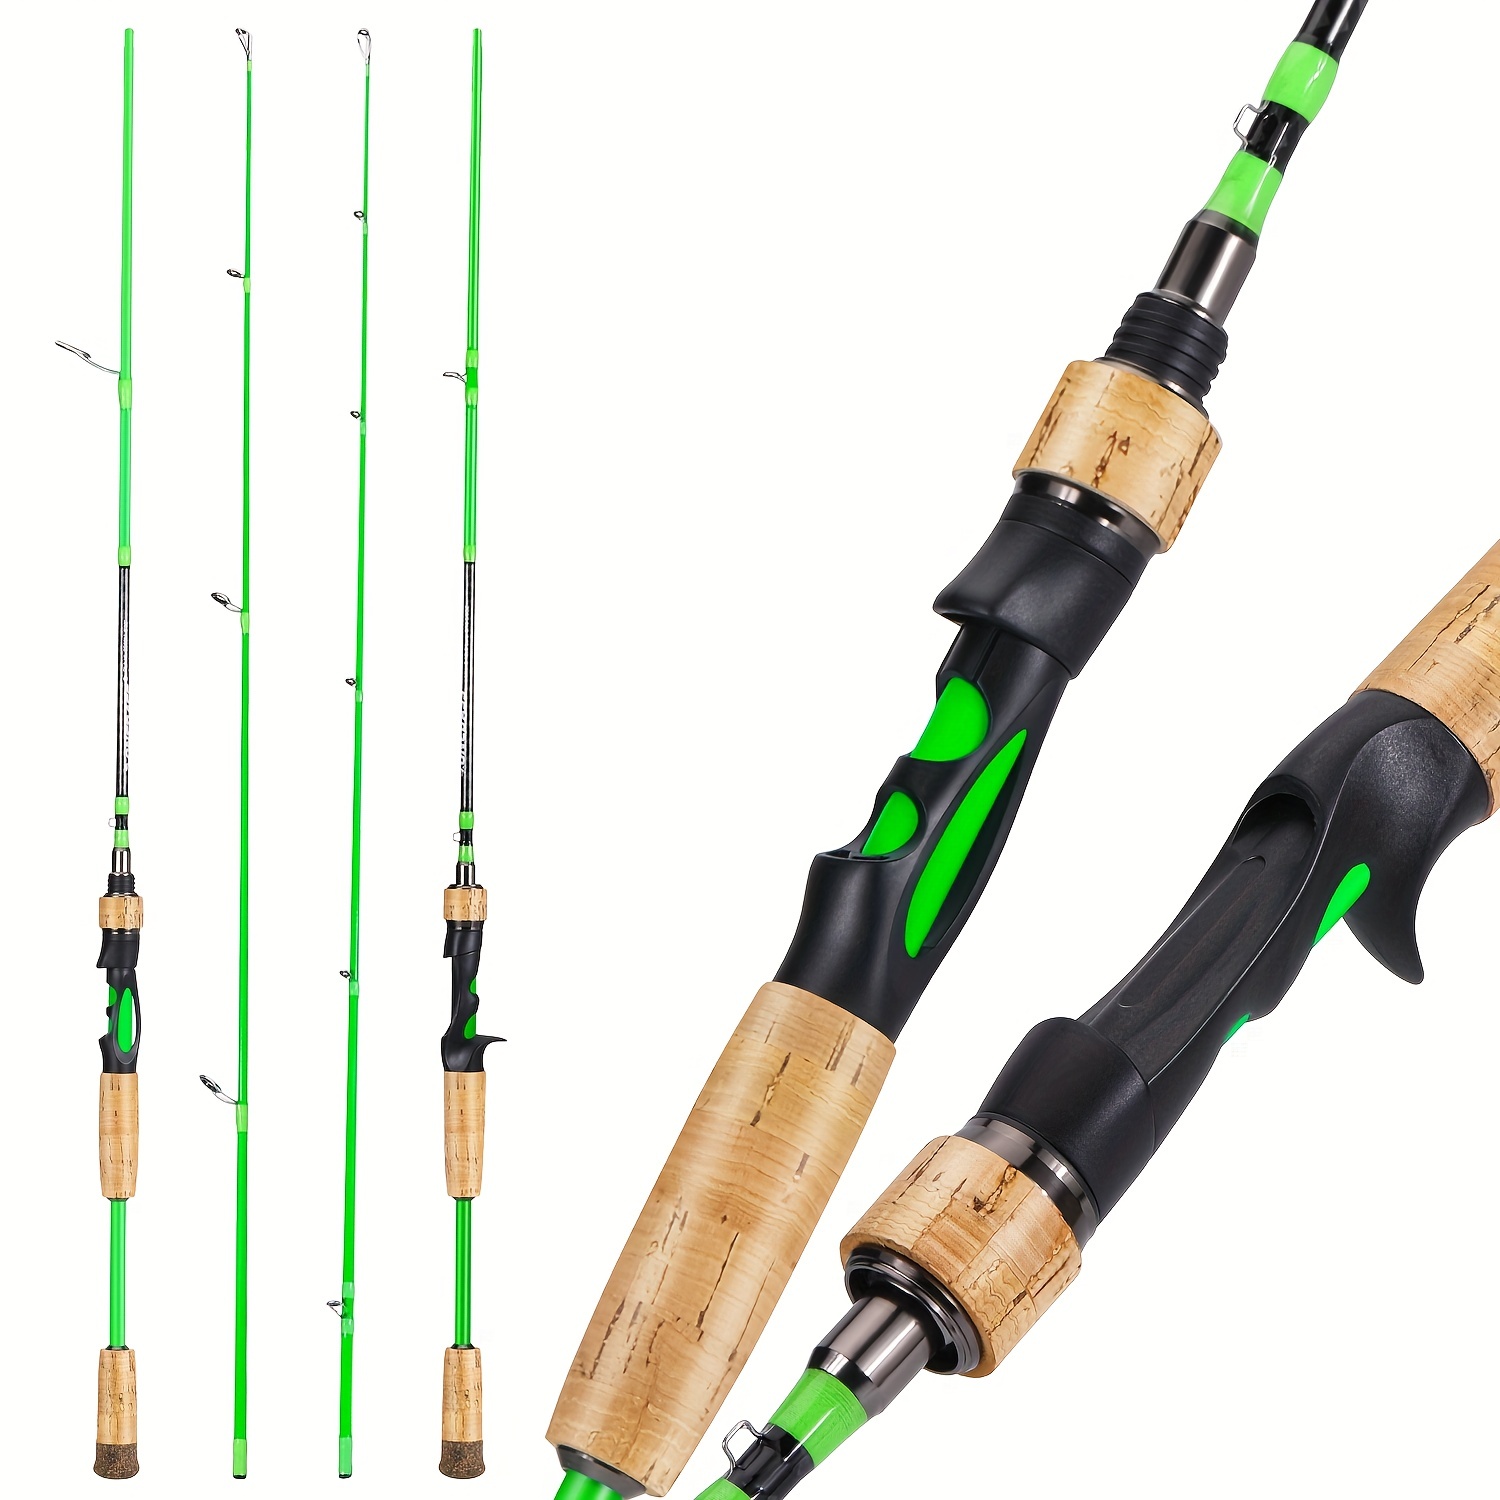 Sougayilang 1pc Fishing Rods, Carbon Fiber Casting/Spinning Rod, Stainless  Steel Guides, Lightweight Baitcasting Two Pieces Inserts Fishing Pole